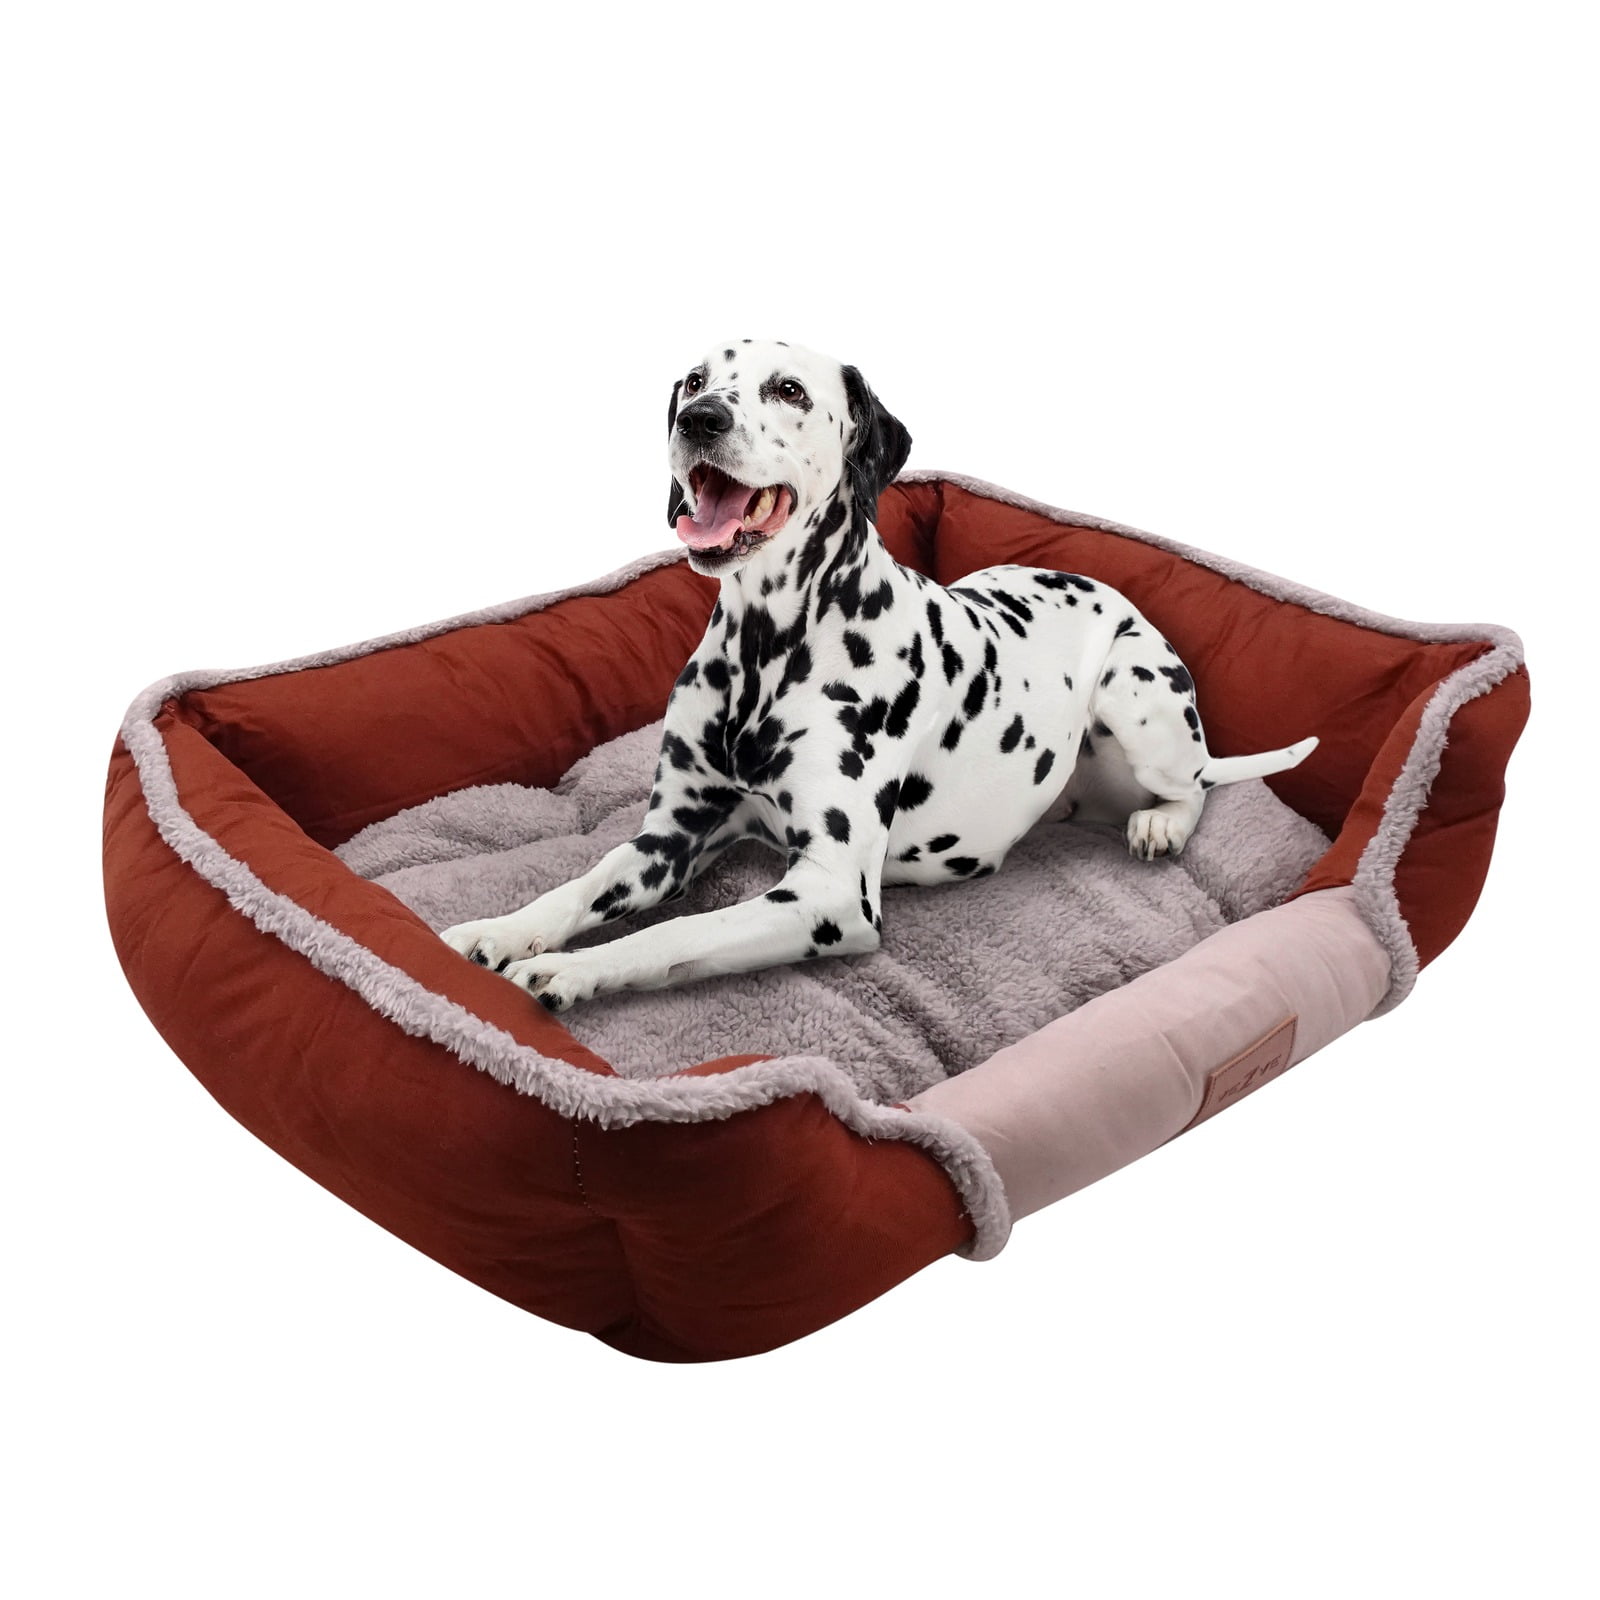 veZve Pet Bed for Large Dogs, Size 22-35 inches - Walmart.com - Walmart.com